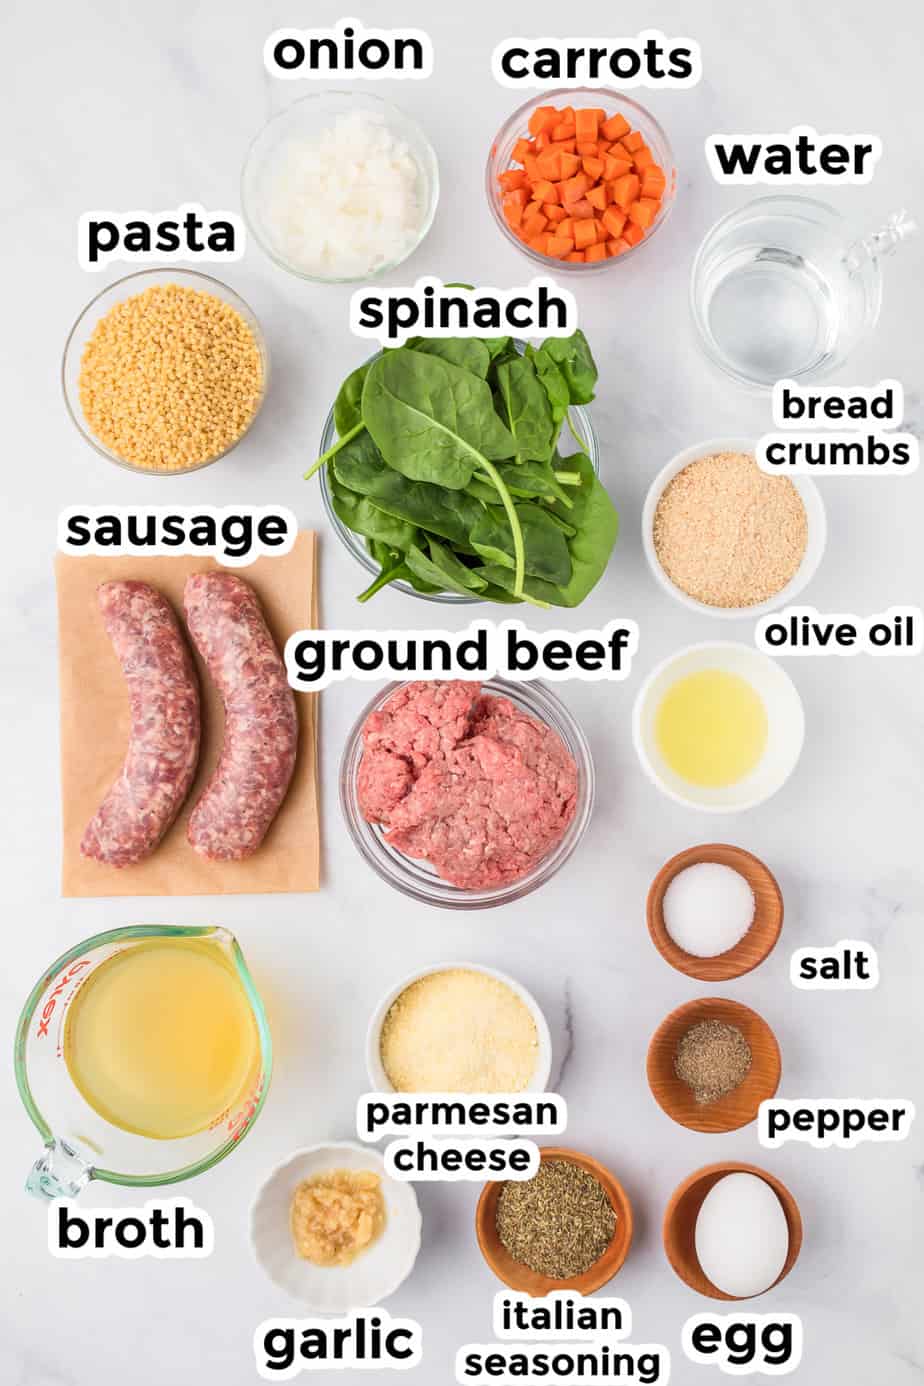 Ingredients for Italian wedding soup in bowls on a counter with text labels.